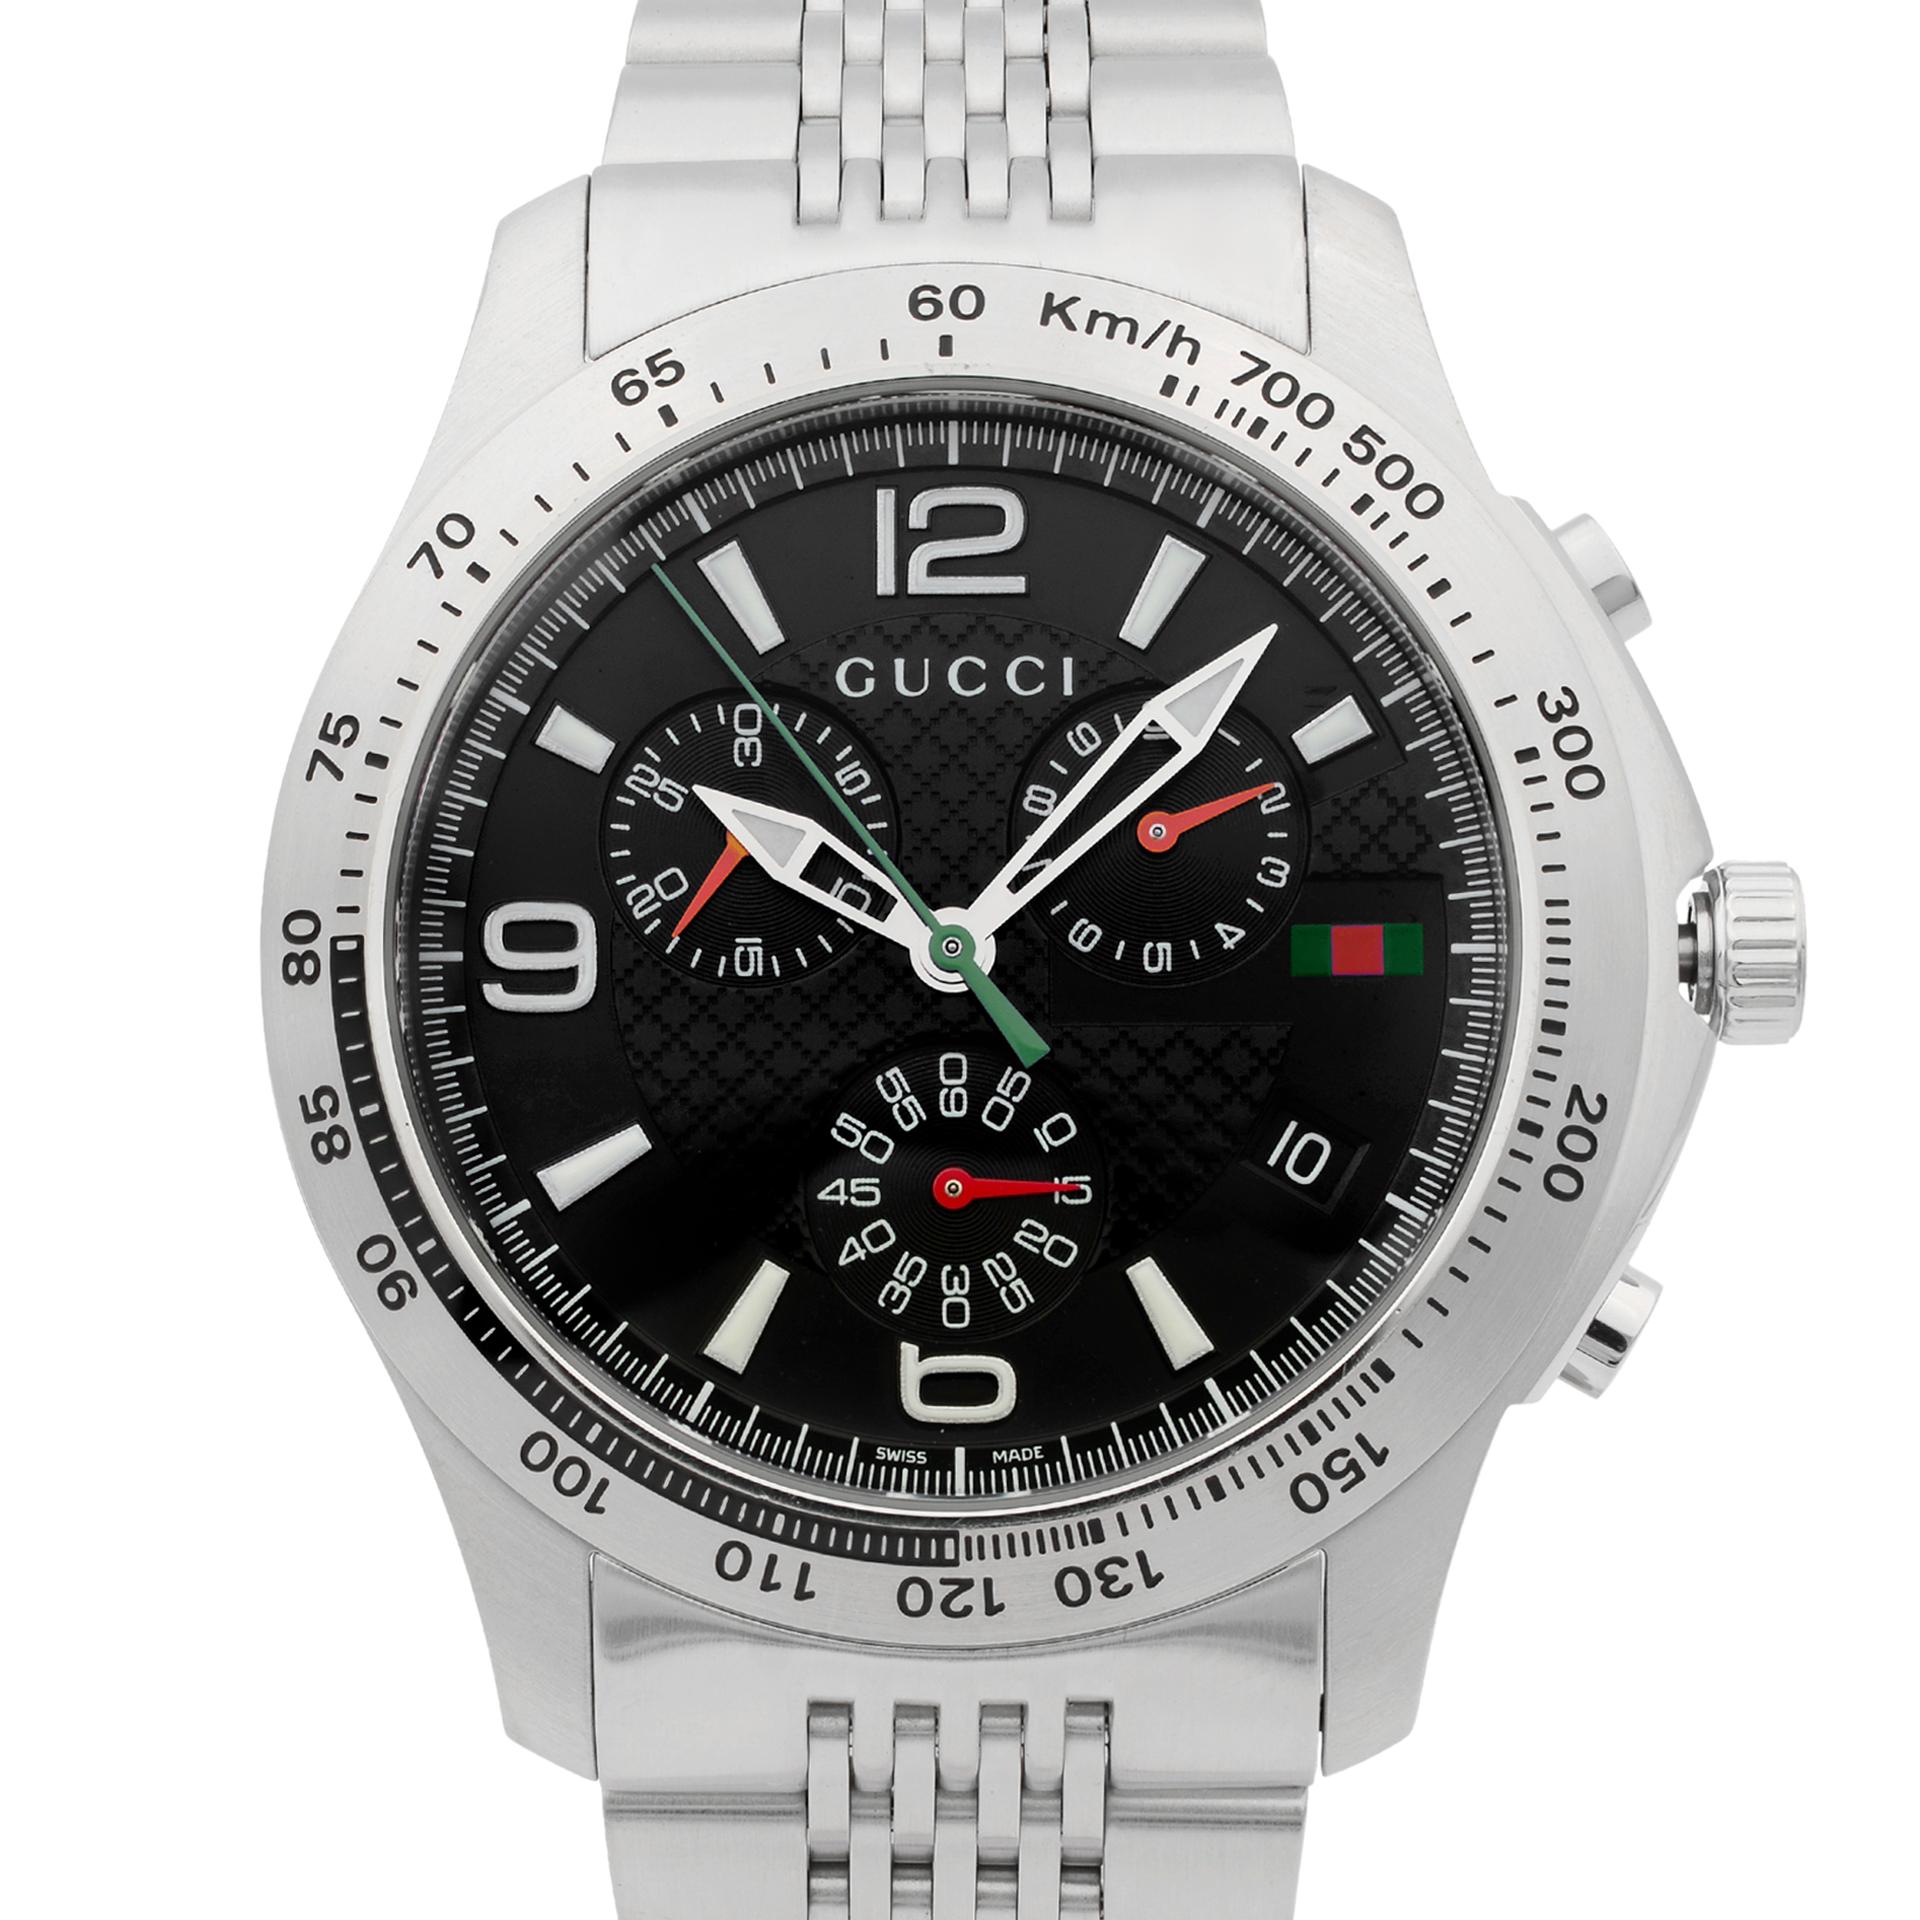 This pre-owned Gucci 126 YA126221  is a beautiful men's timepiece that is powered by quartz (battery) movement which is cased in a stainless steel case. It has a round shape face, chronograph, date indicator, small seconds subdial dial and has hand